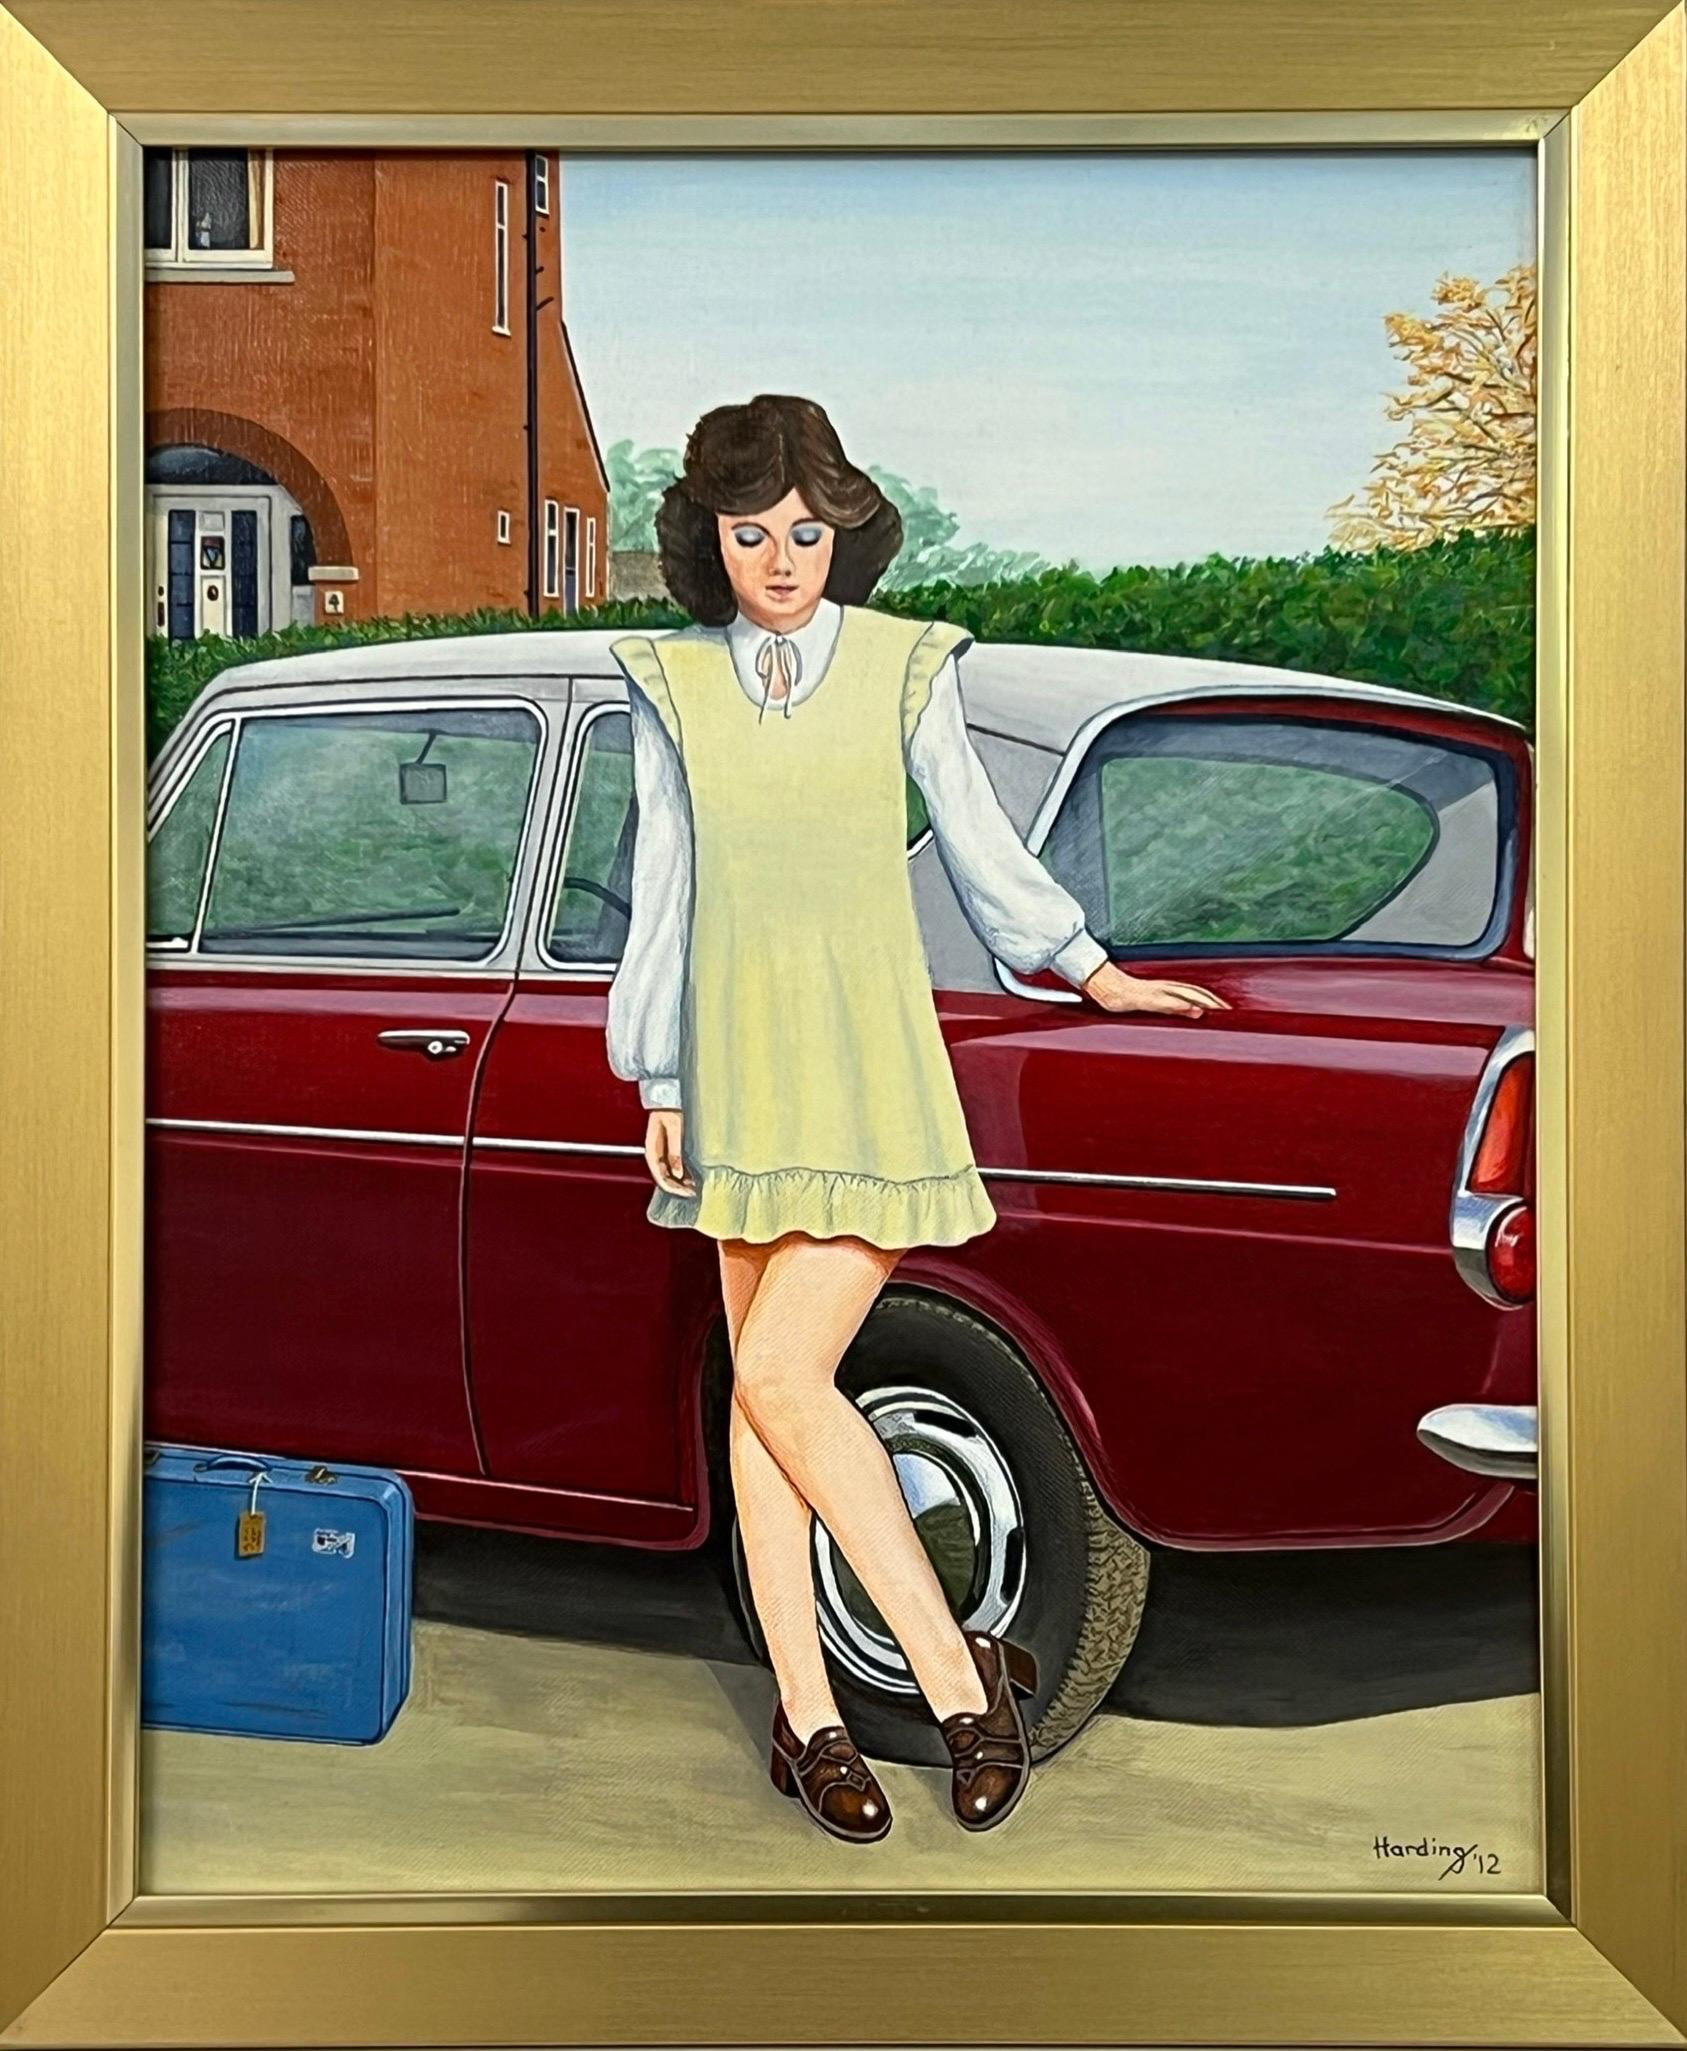 Paul F Harding Portrait Painting - Vintage English Woman in Suburbia with Classic Ford Car 1960's 1970's England 